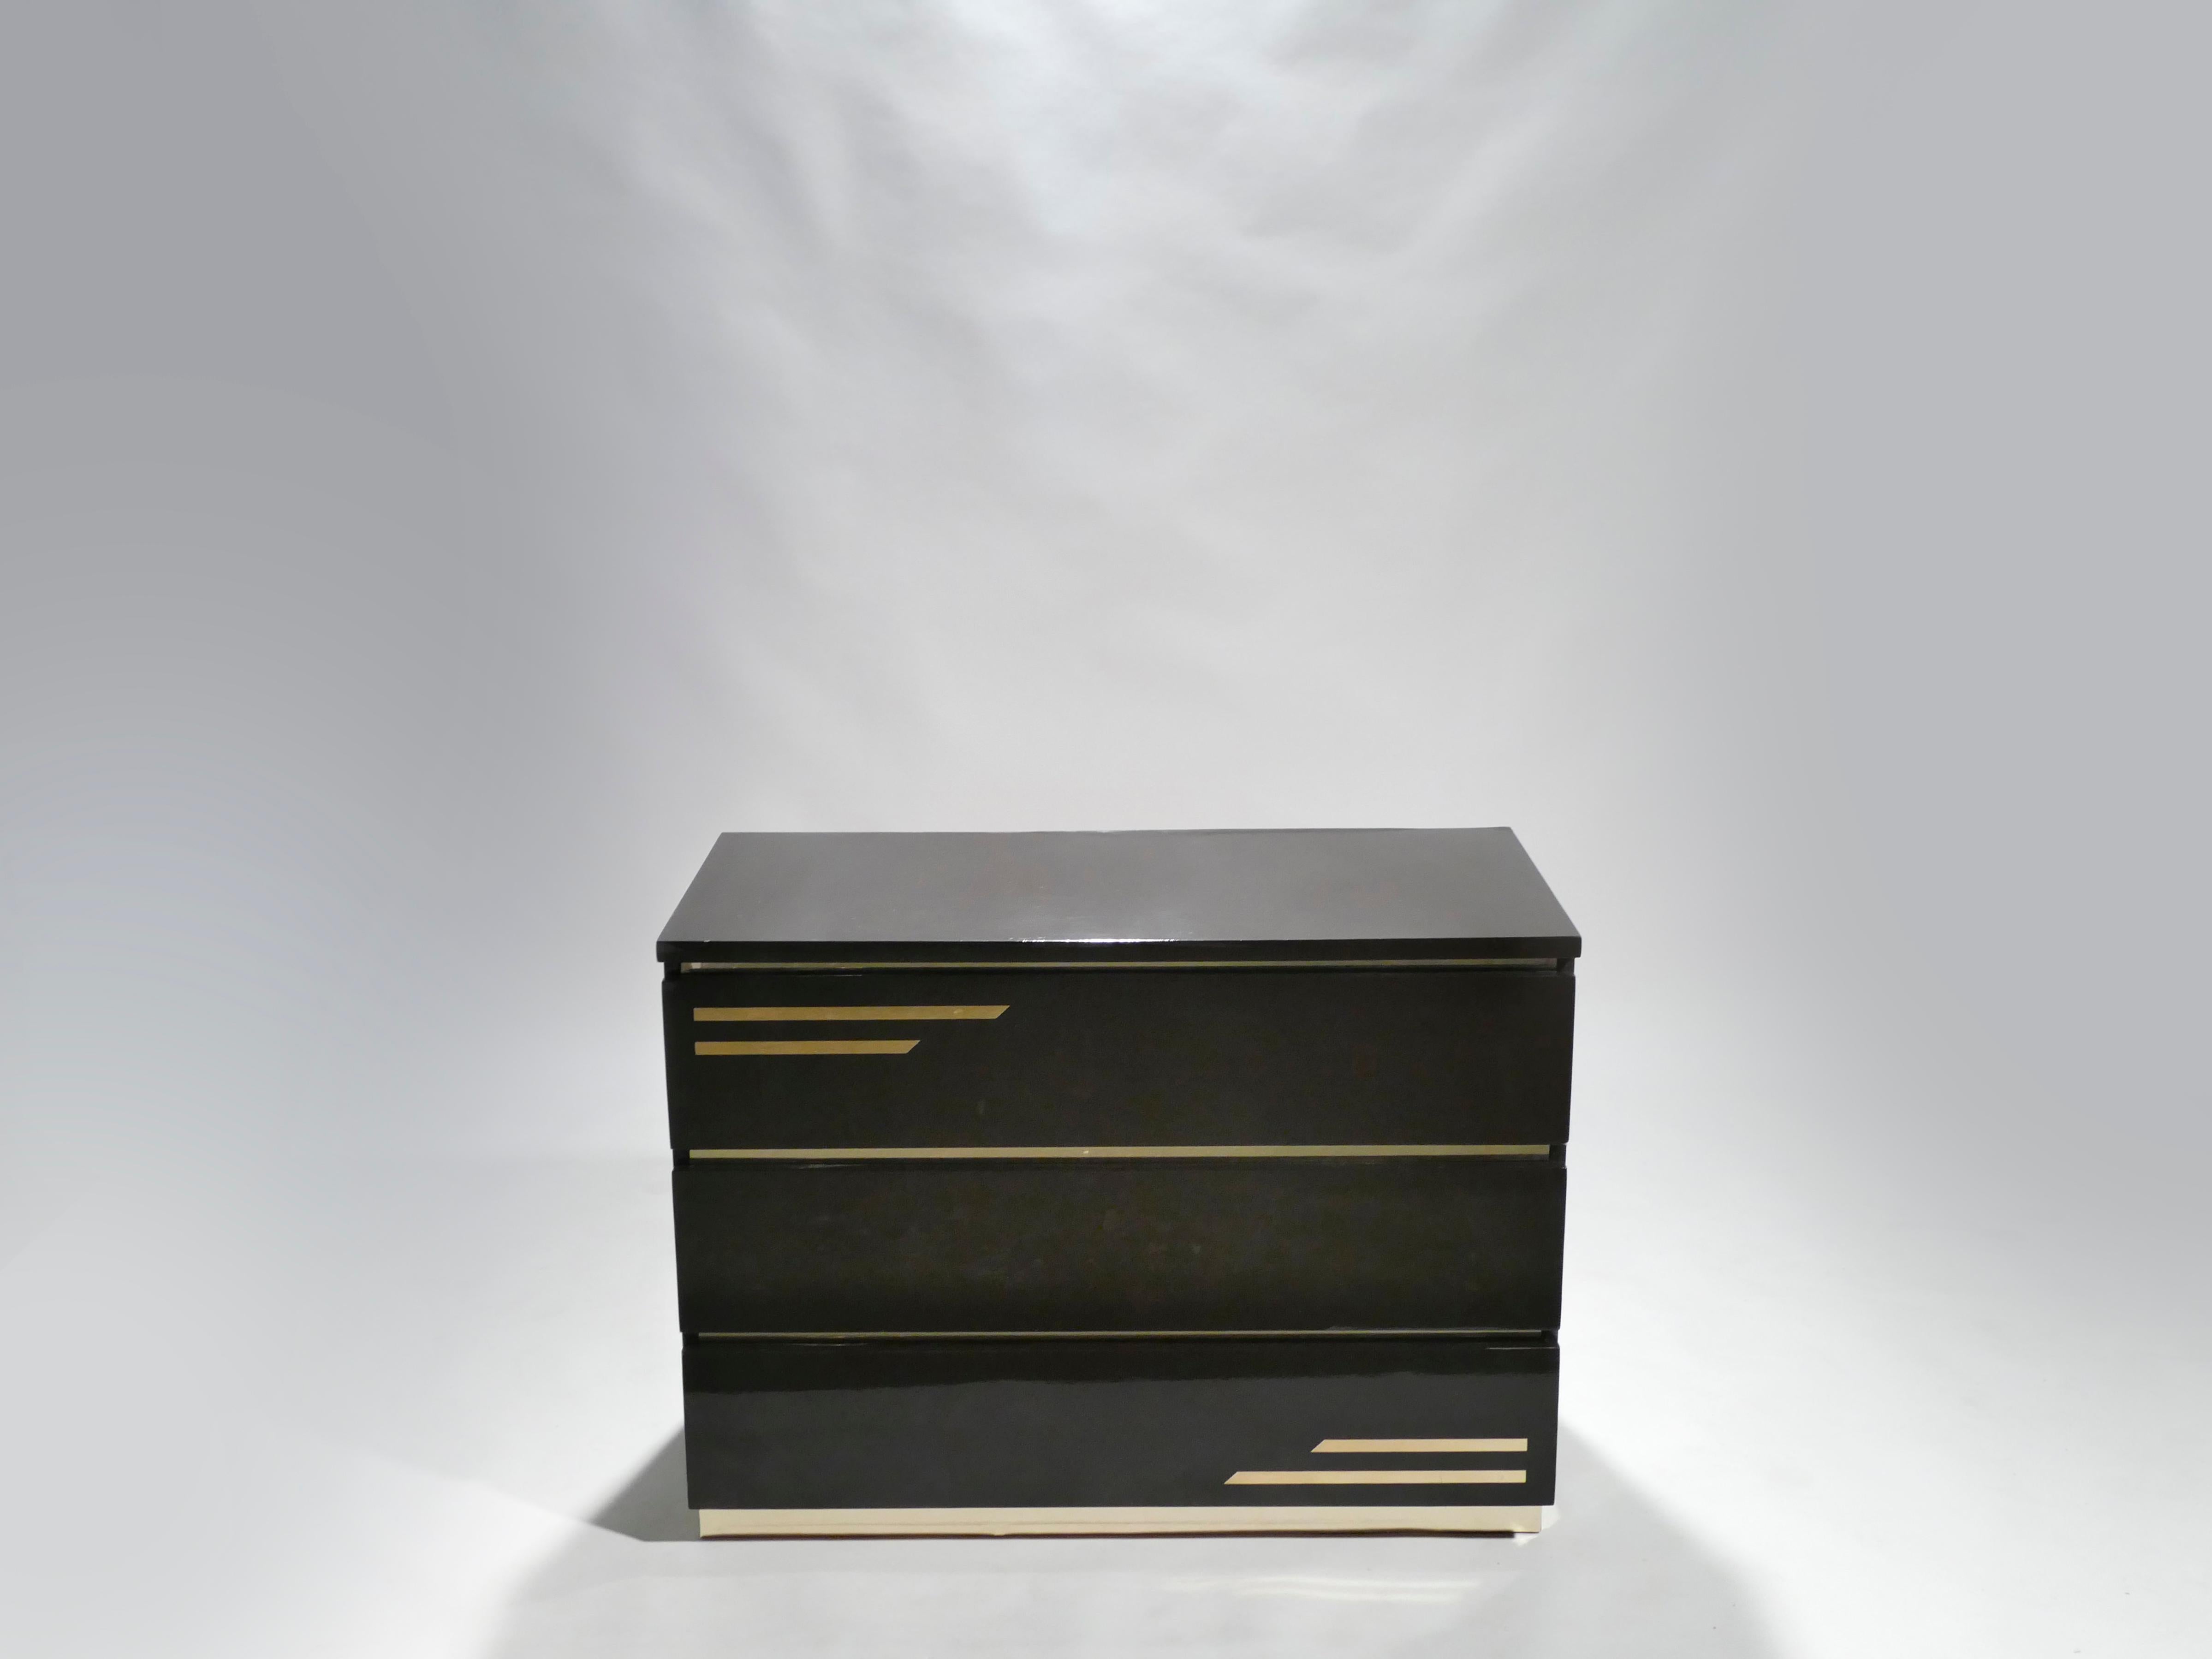 Crisp black lacquer, paired with bright brass accents, feels luxurious on this chest of drawers. It’s boxy, simple style is typical of both the 1970s and French designer Jean Claude Mahey. Whether used in a bedroom, living room or entrance, this